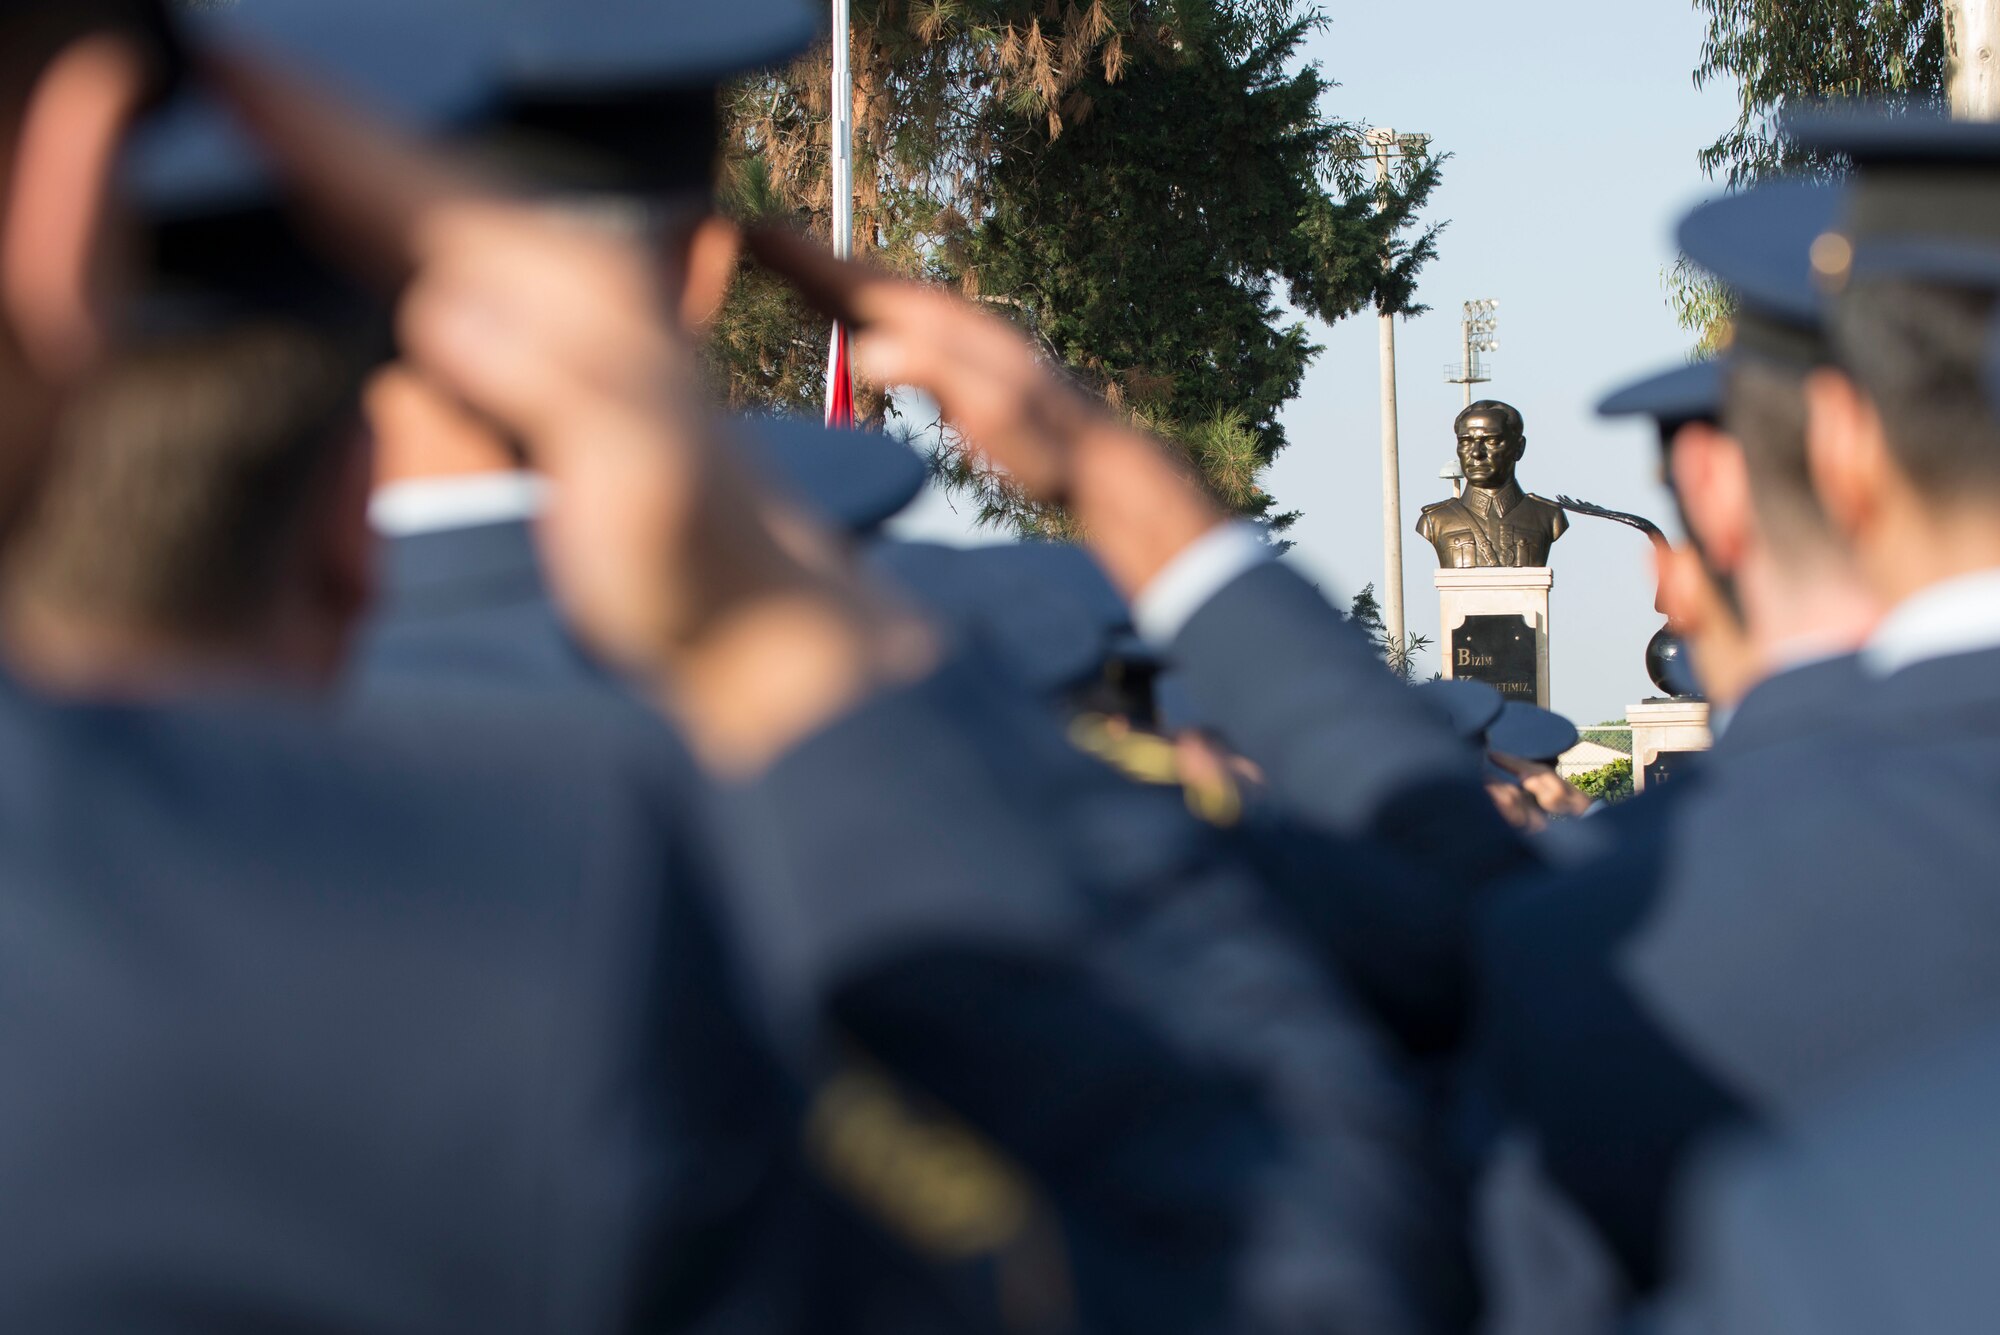 Turkish Air Force members assigned to the 10th Tanker Base salute a statue of Mustafa Kemal Ataturk during a memorial ceremony Nov. 10, 2016, at Incirlik Air Base, Turkey. More than 300 service members gathered for the ceremony to pay homage to Ataturk. (U.S. Air Force photo by Senior Airman John Nieves Camacho)